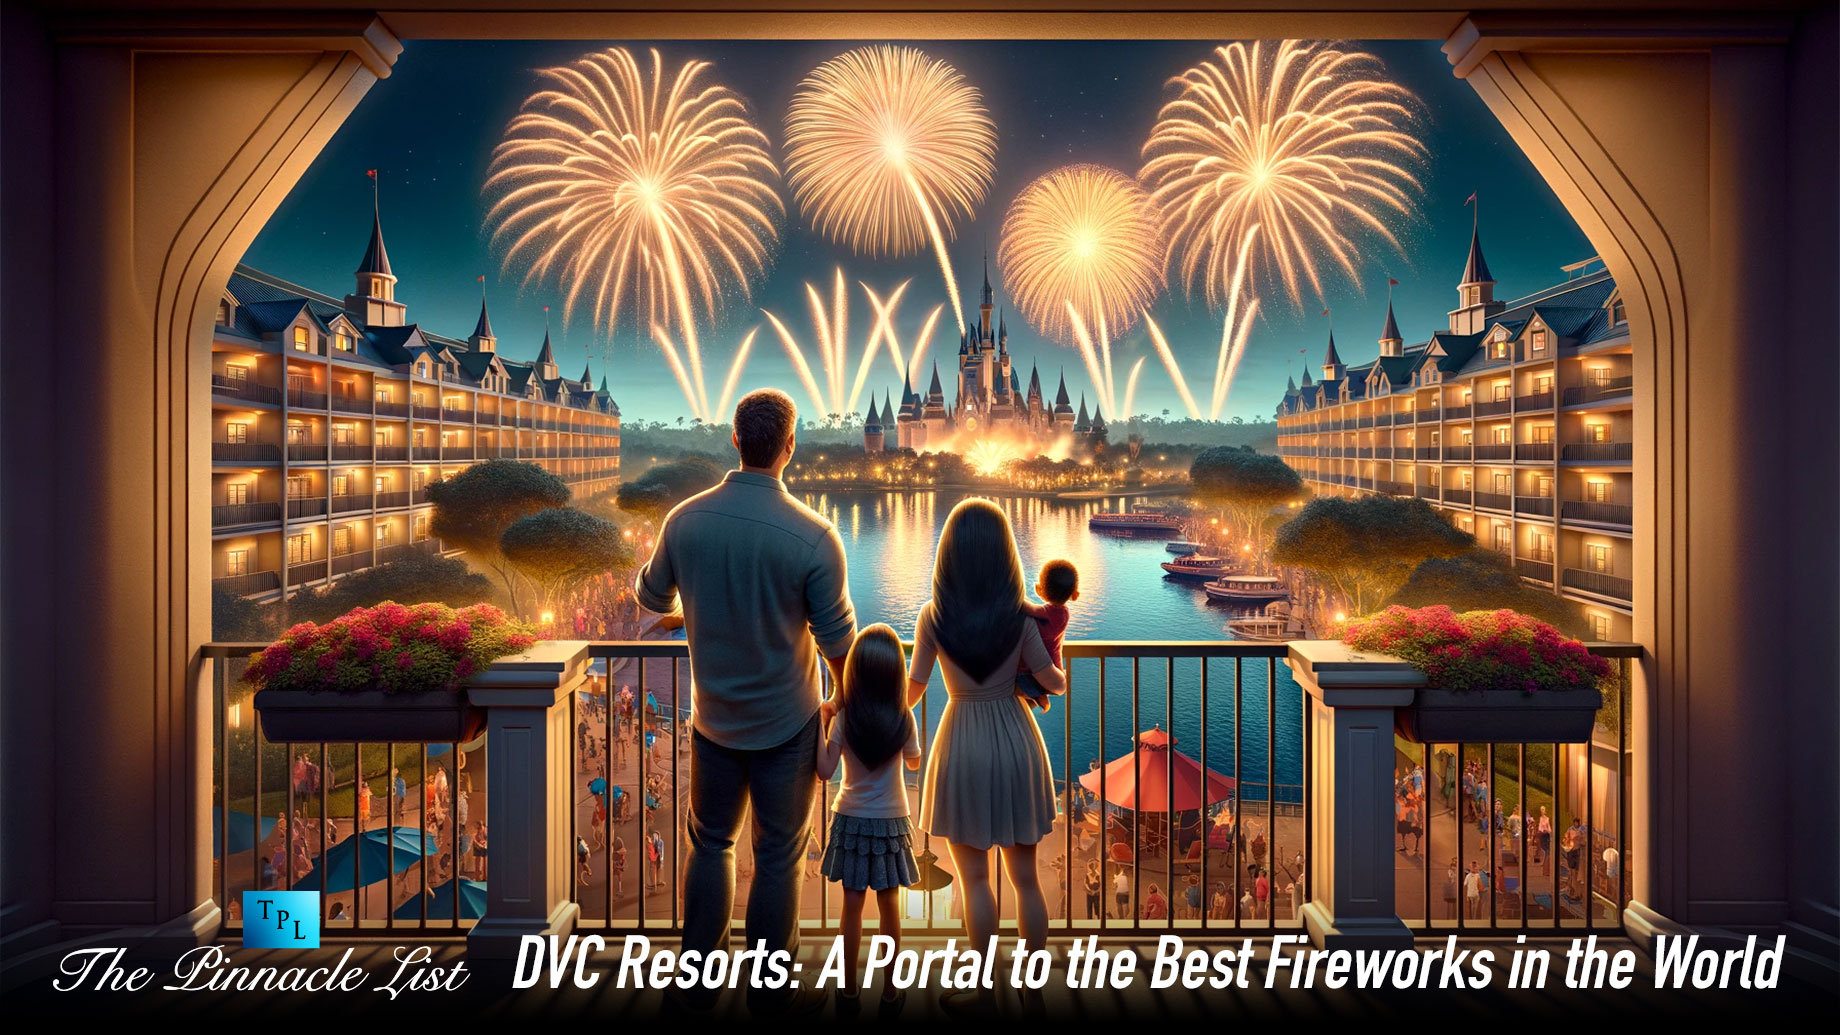 DVC Resorts: A Portal to the Best Fireworks in the World